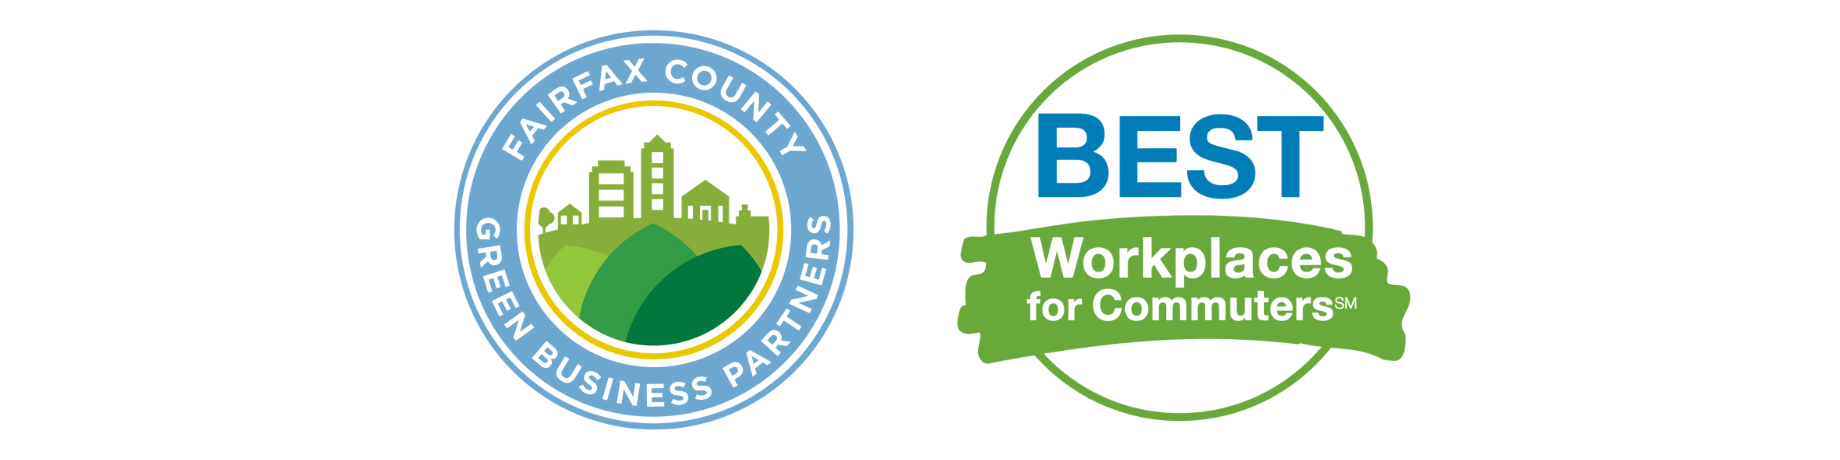 green business partners and best workplace for commuters logos side by side